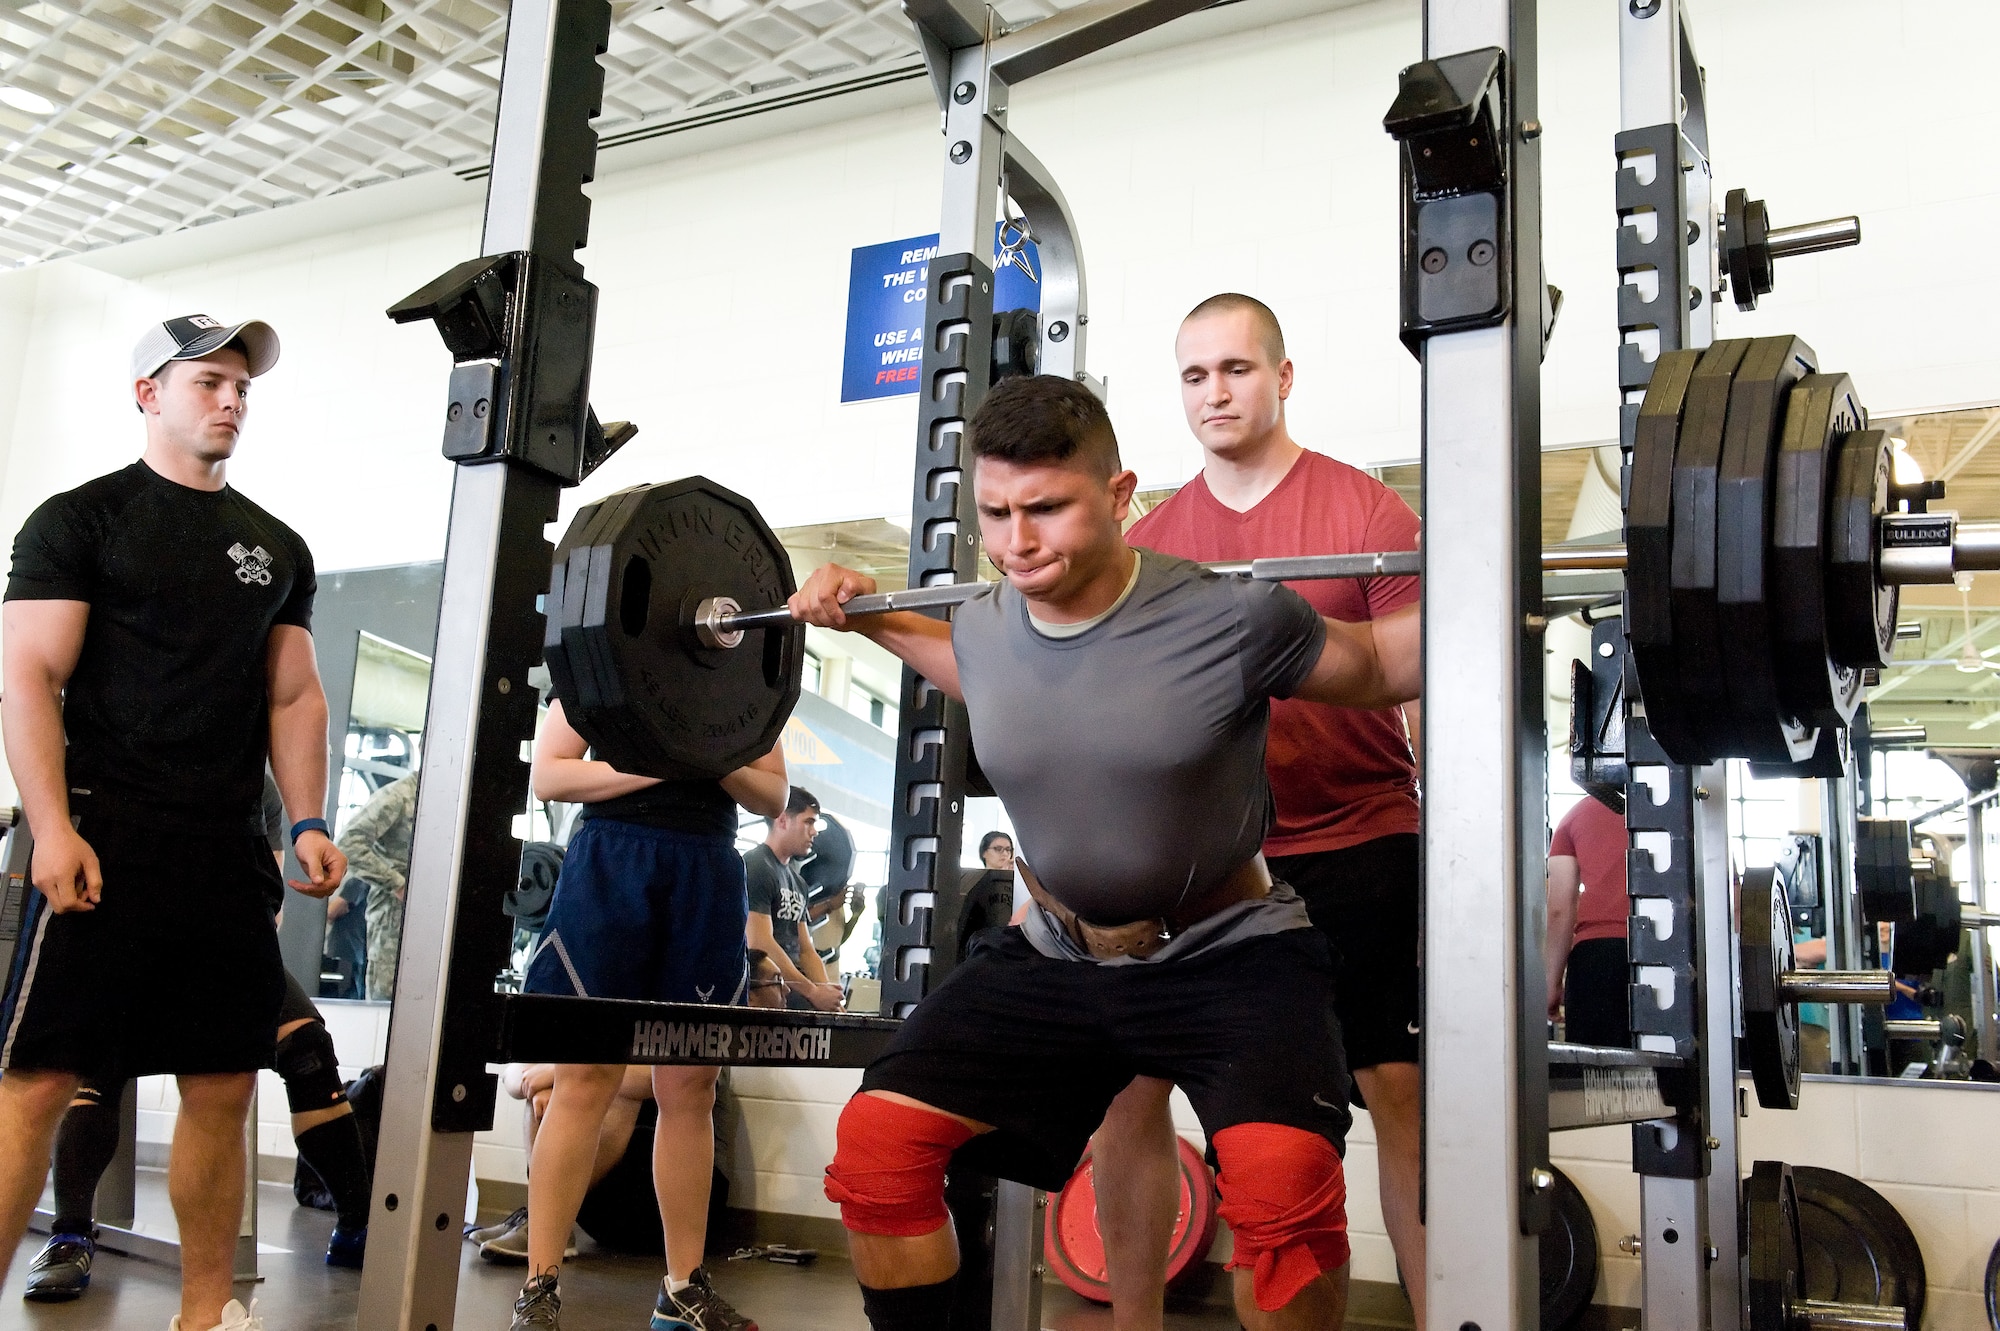 Edwin Hernandez squats 405 pounds on his first attempt in the squat during the powerlifting competition May 8, 2015, at the Fitness Center on Dover Air Force Base, Del. Hernandez placed second in the male 181-pound weight class with a combined total of 1,220 pounds. The competition was sponsored by the Dover Chief's Group and used Revolution Powerlifting Syndicate rules to judge competitors on their squat, bench press and deadlift attempts. (U.S. Air Force photo/Roland Balik)